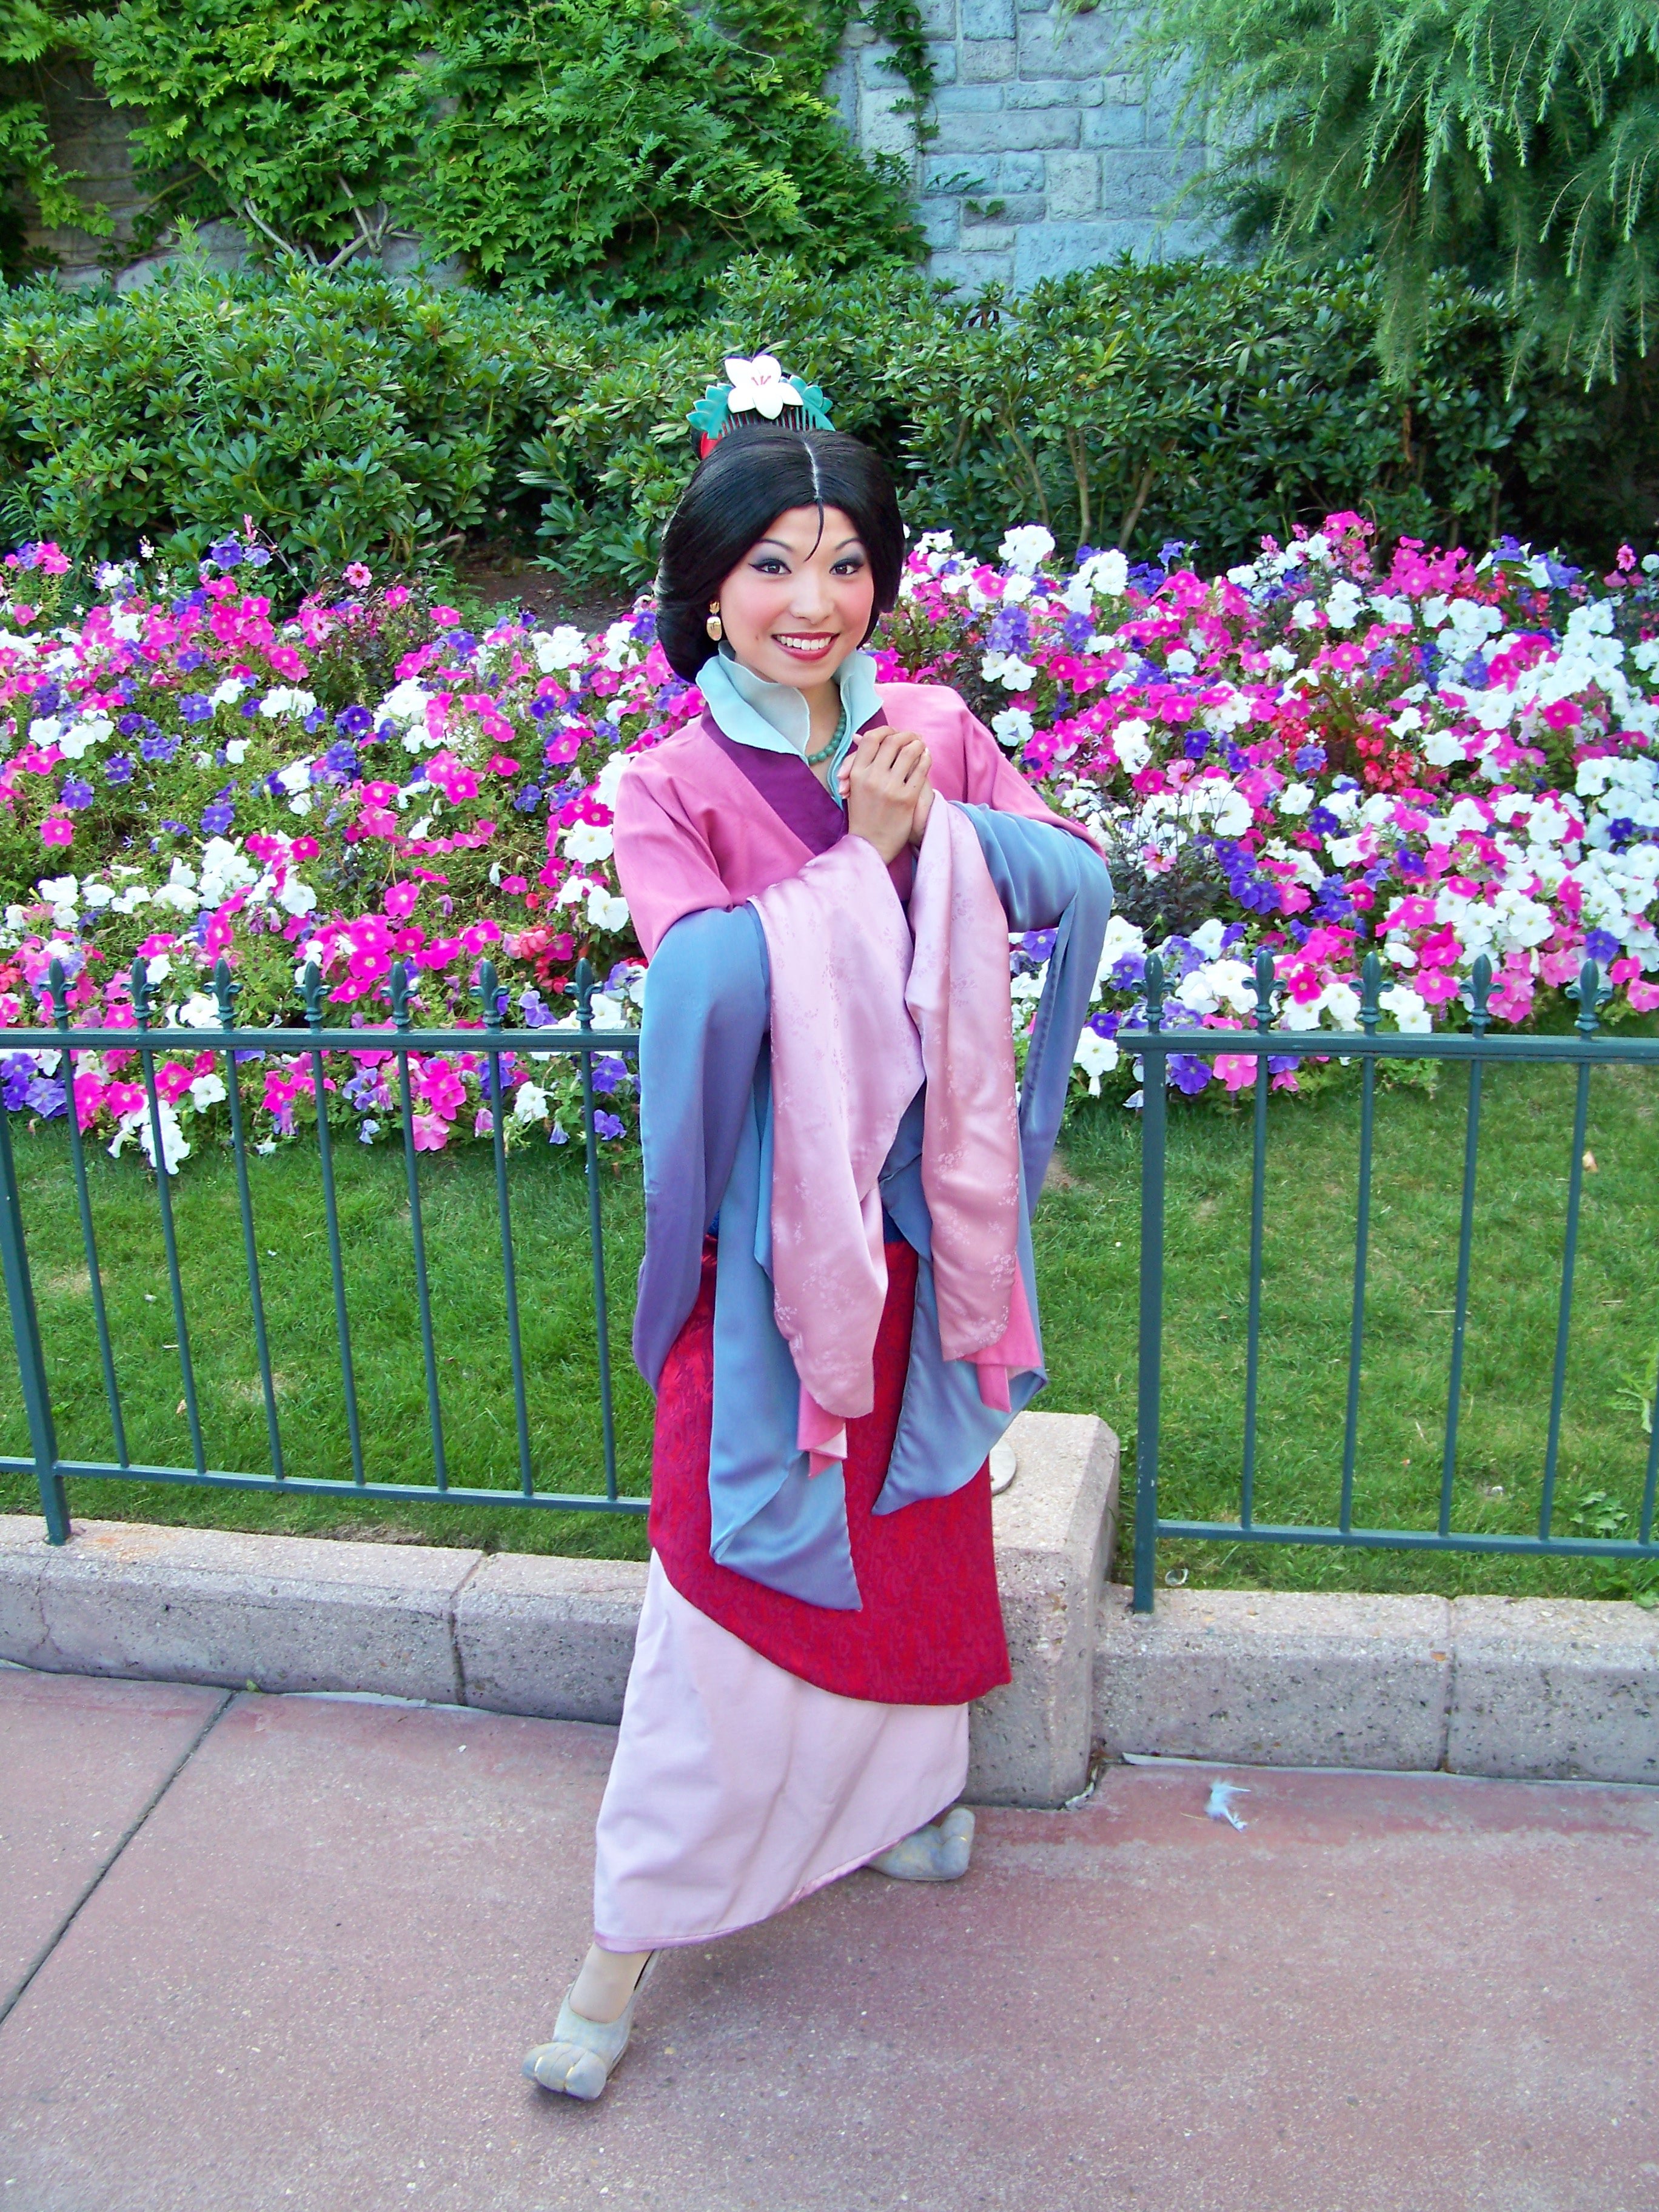 Mulan can be found in the Stars'n'Cars Parade at the Walt Disney Studios almost every day. She also does Meet'n'Greets almost every day at the Walt Disney Studios or Disneyland Park.